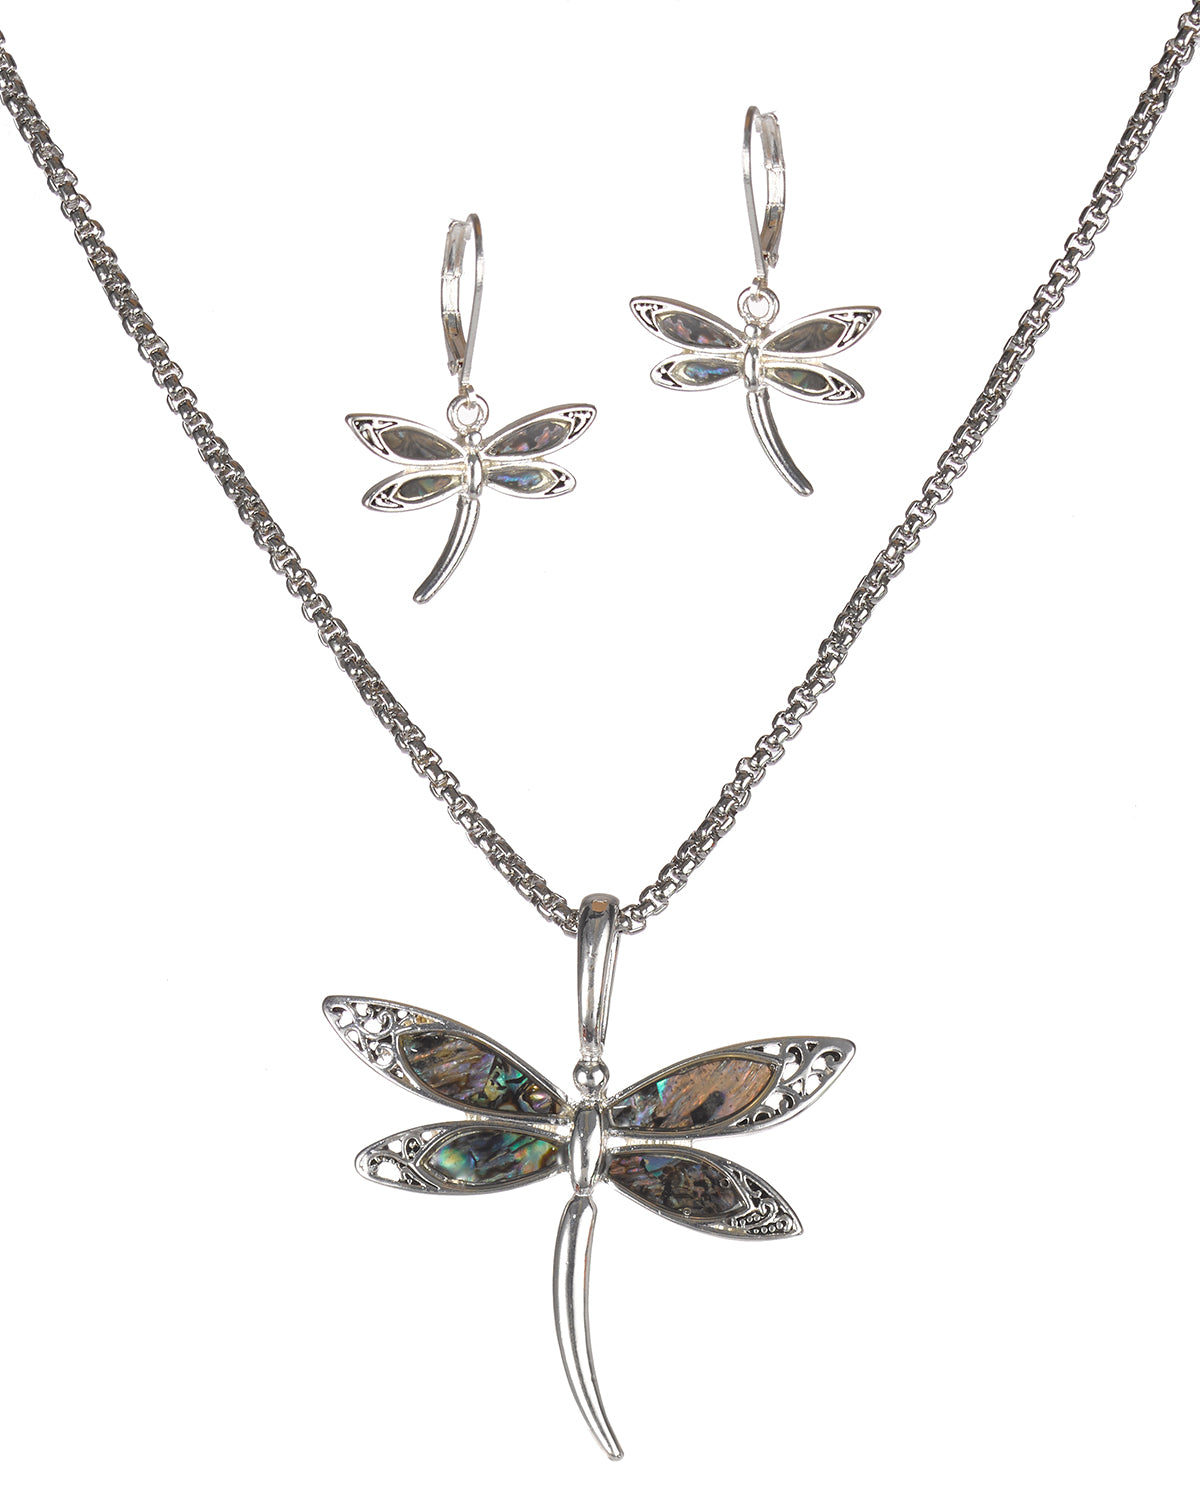 Green Abalone Dragonfly with Filigree Pattern in a Silver-tone